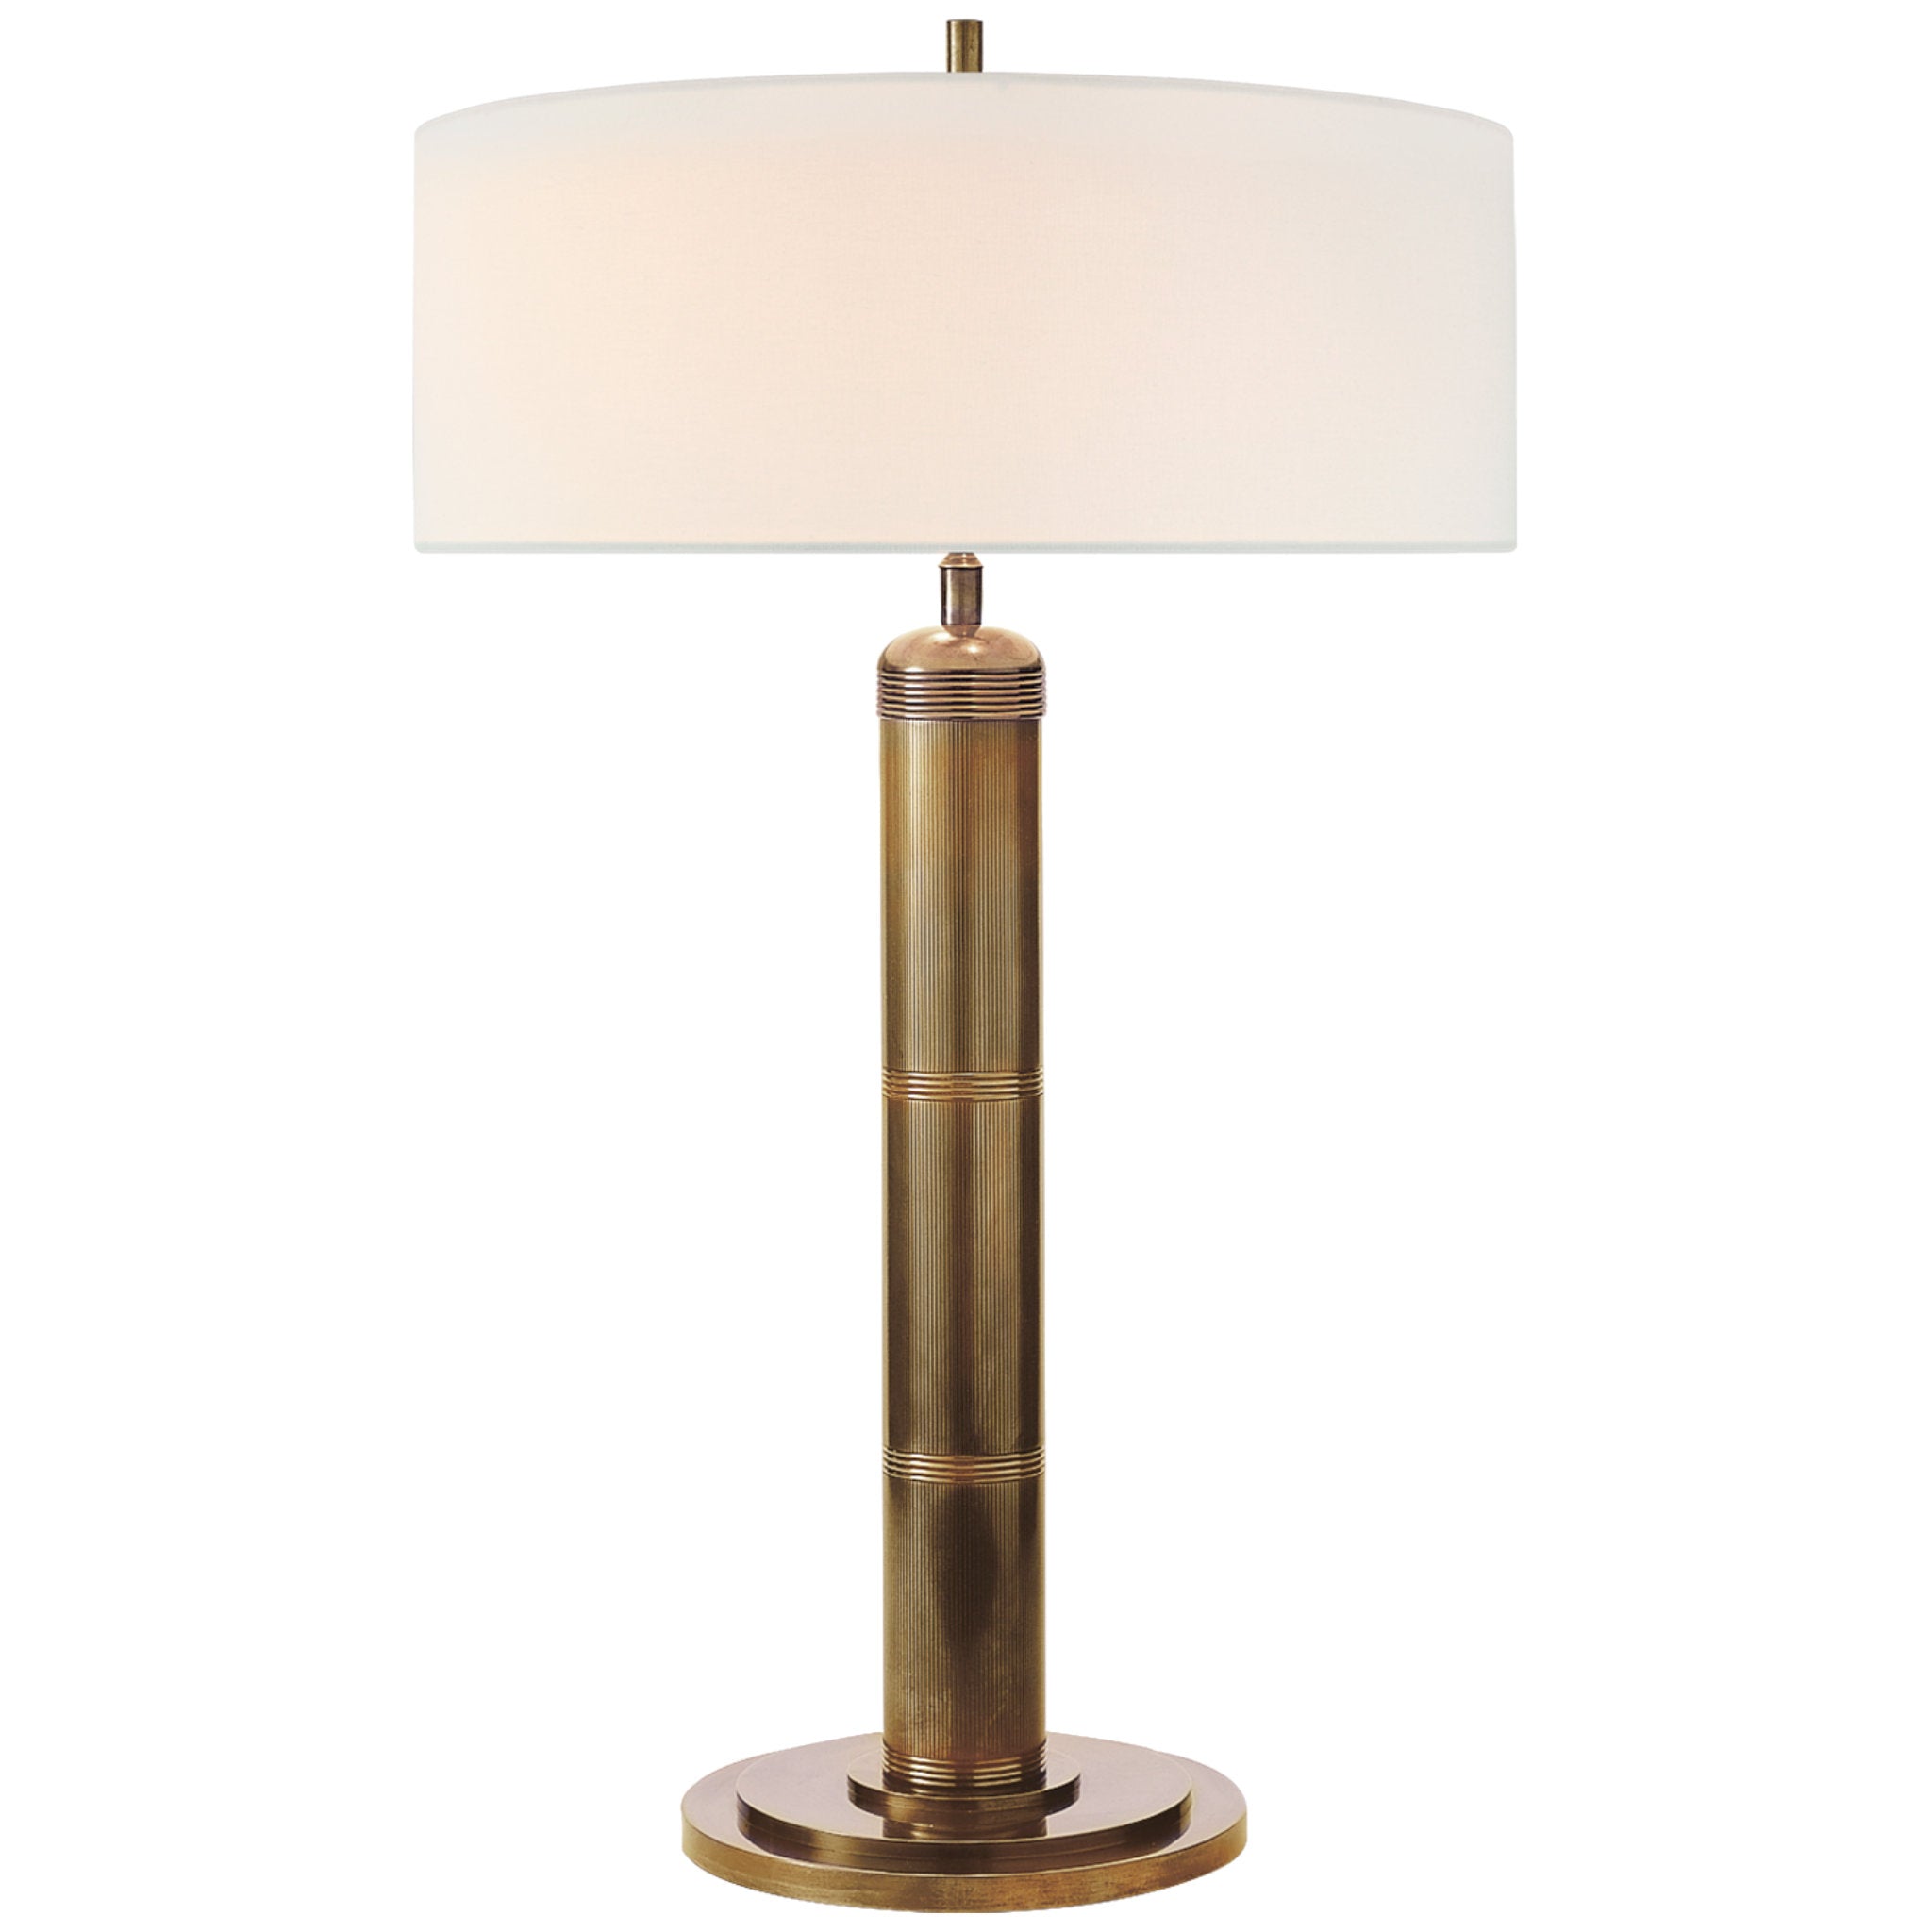 Thomas O'Brien Longacre Tall Table Lamp in Hand-Rubbed Antique Brass with Linen Shade